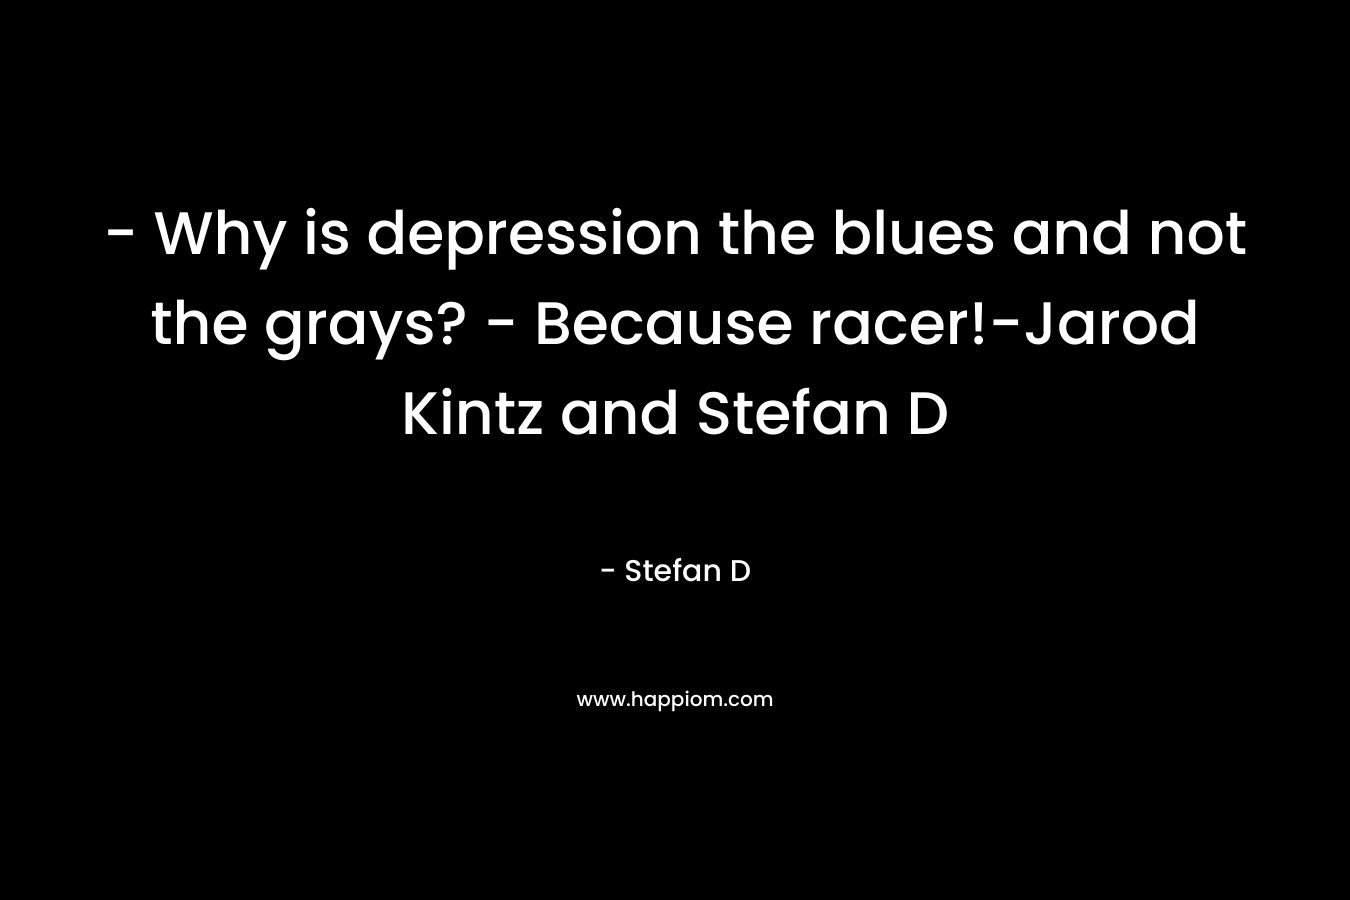 - Why is depression the blues and not the grays? - Because racer!-Jarod Kintz and Stefan D